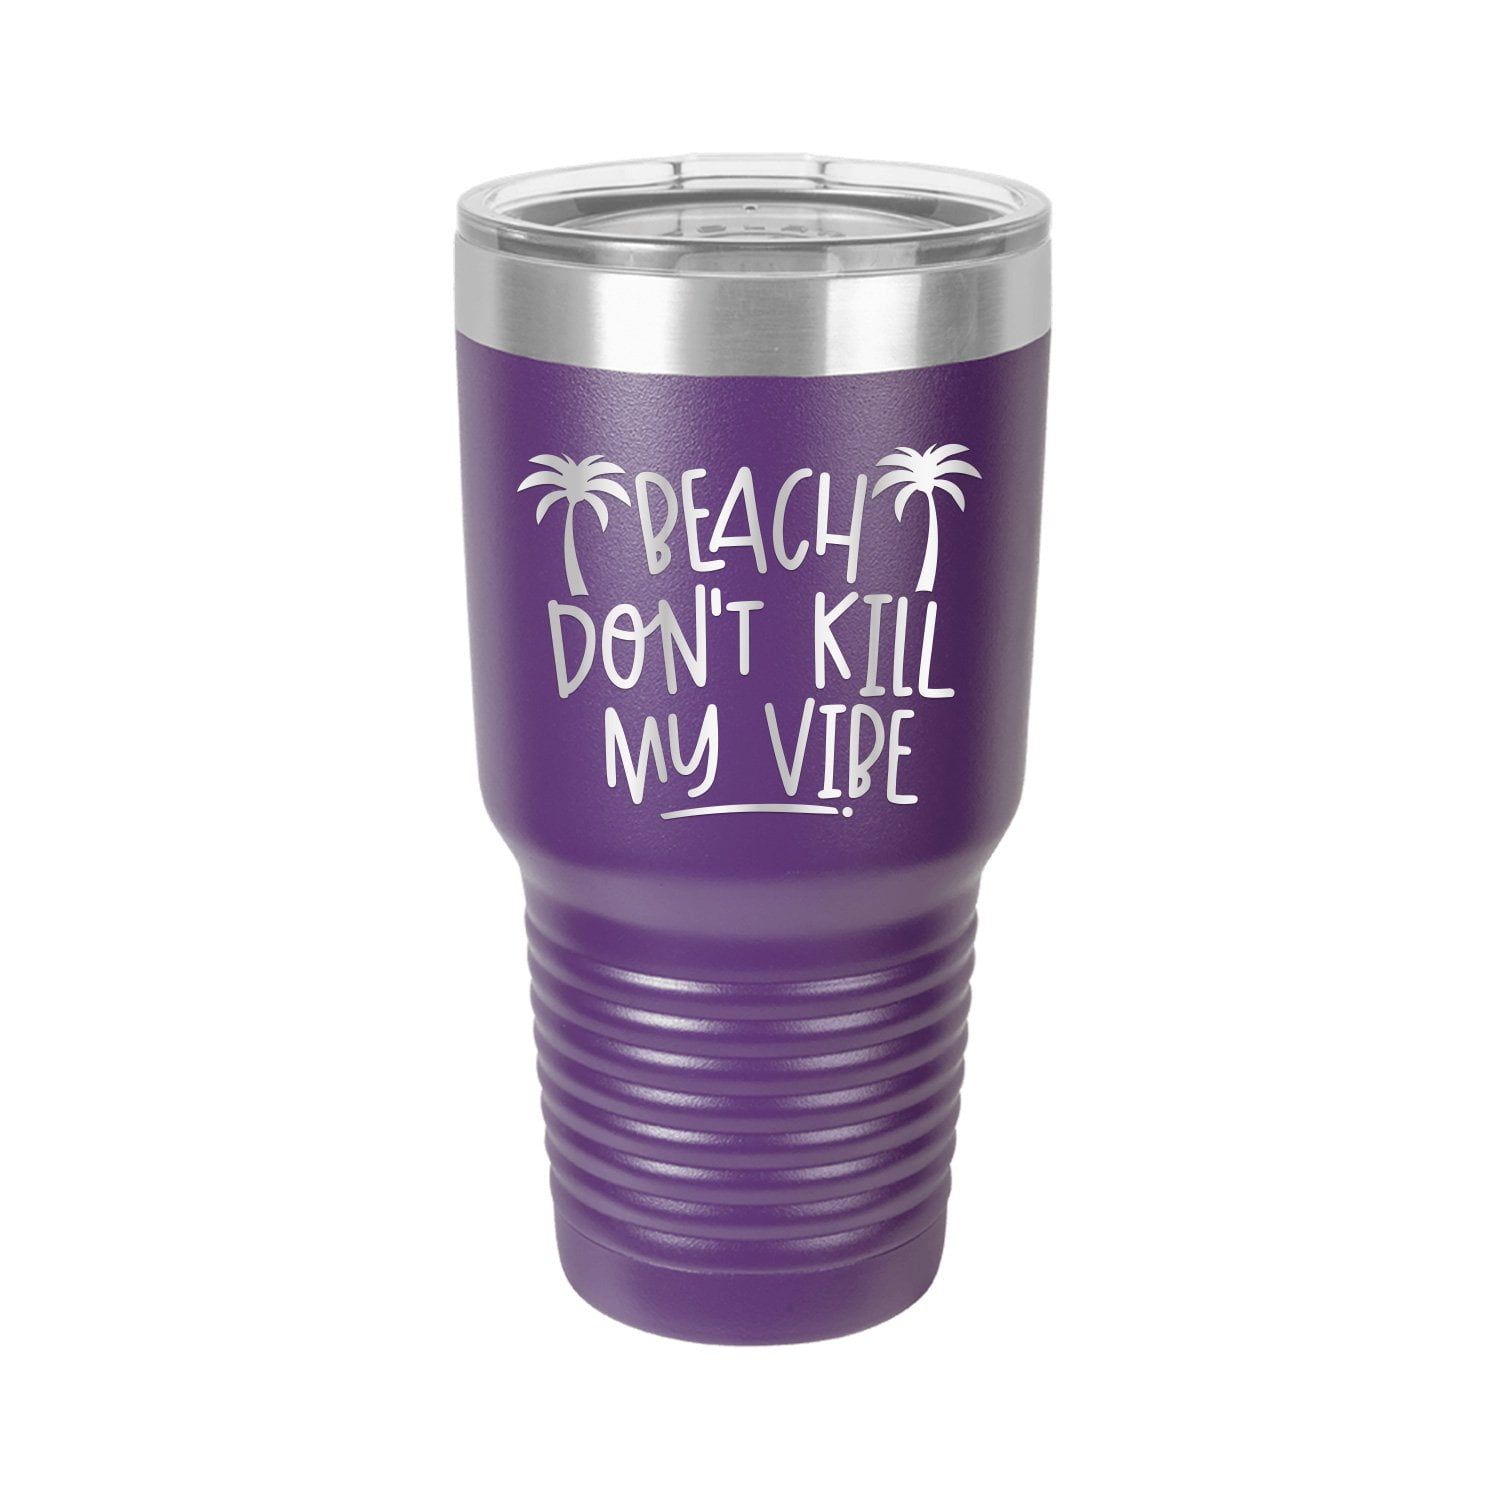 Beach Don't Kill My Vibe - Engraved 30 oz Tumbler Mug Cup Unique Funny  Birthday Gift Graduation Gifts for Men Women Beach Sand Sun Beaches Summer  Outdoors (30 Ring, PRP) 